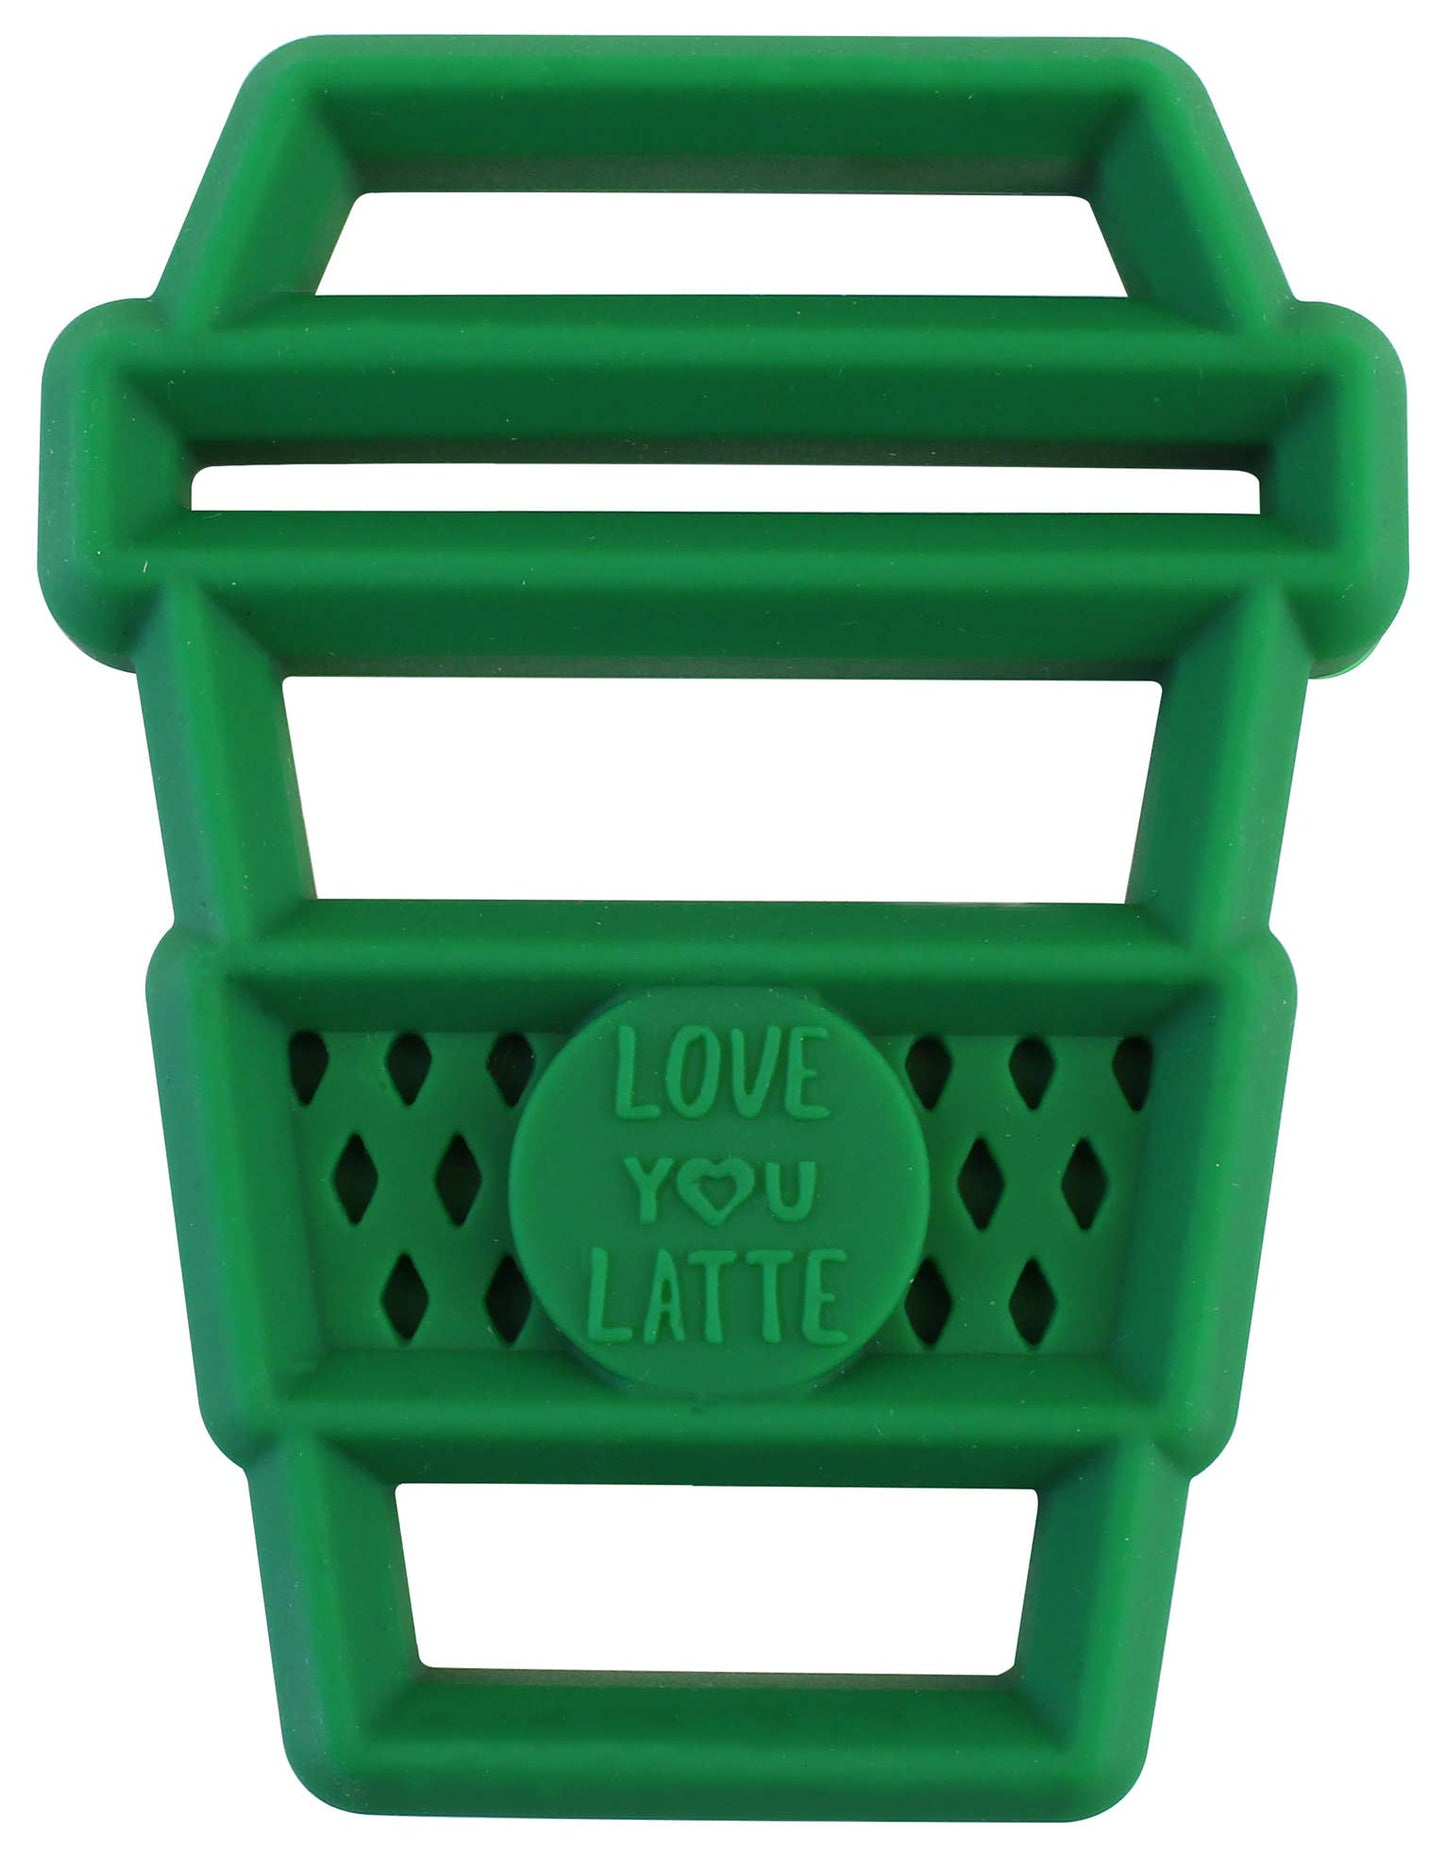 Chew Crew™ Silicone Baby Teethers- Latte